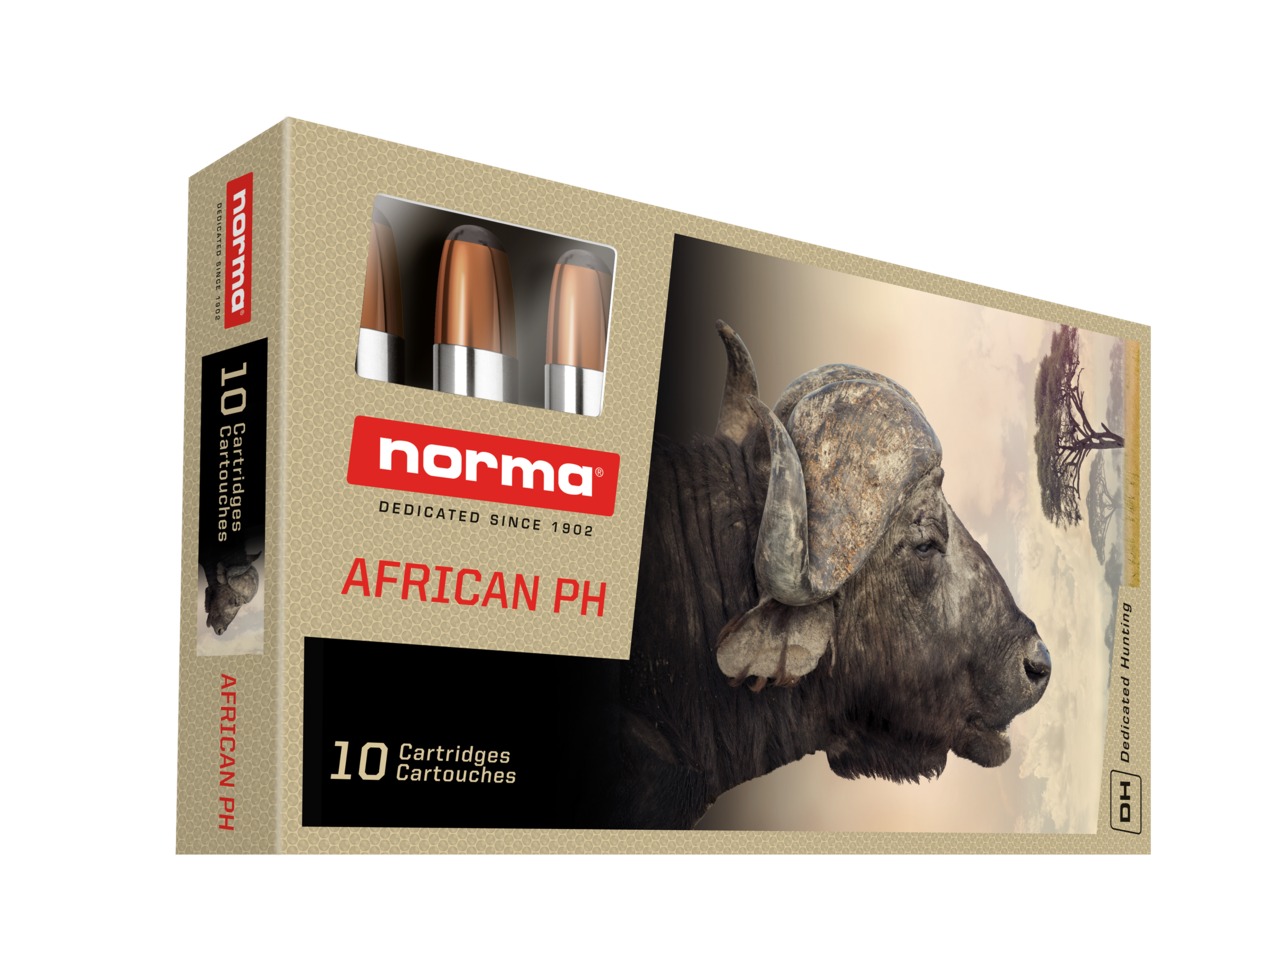 CART NORMA .375 FLANGED 300GR RNSN AFRICAN PH BTE 10 ref 20195222 NORMA